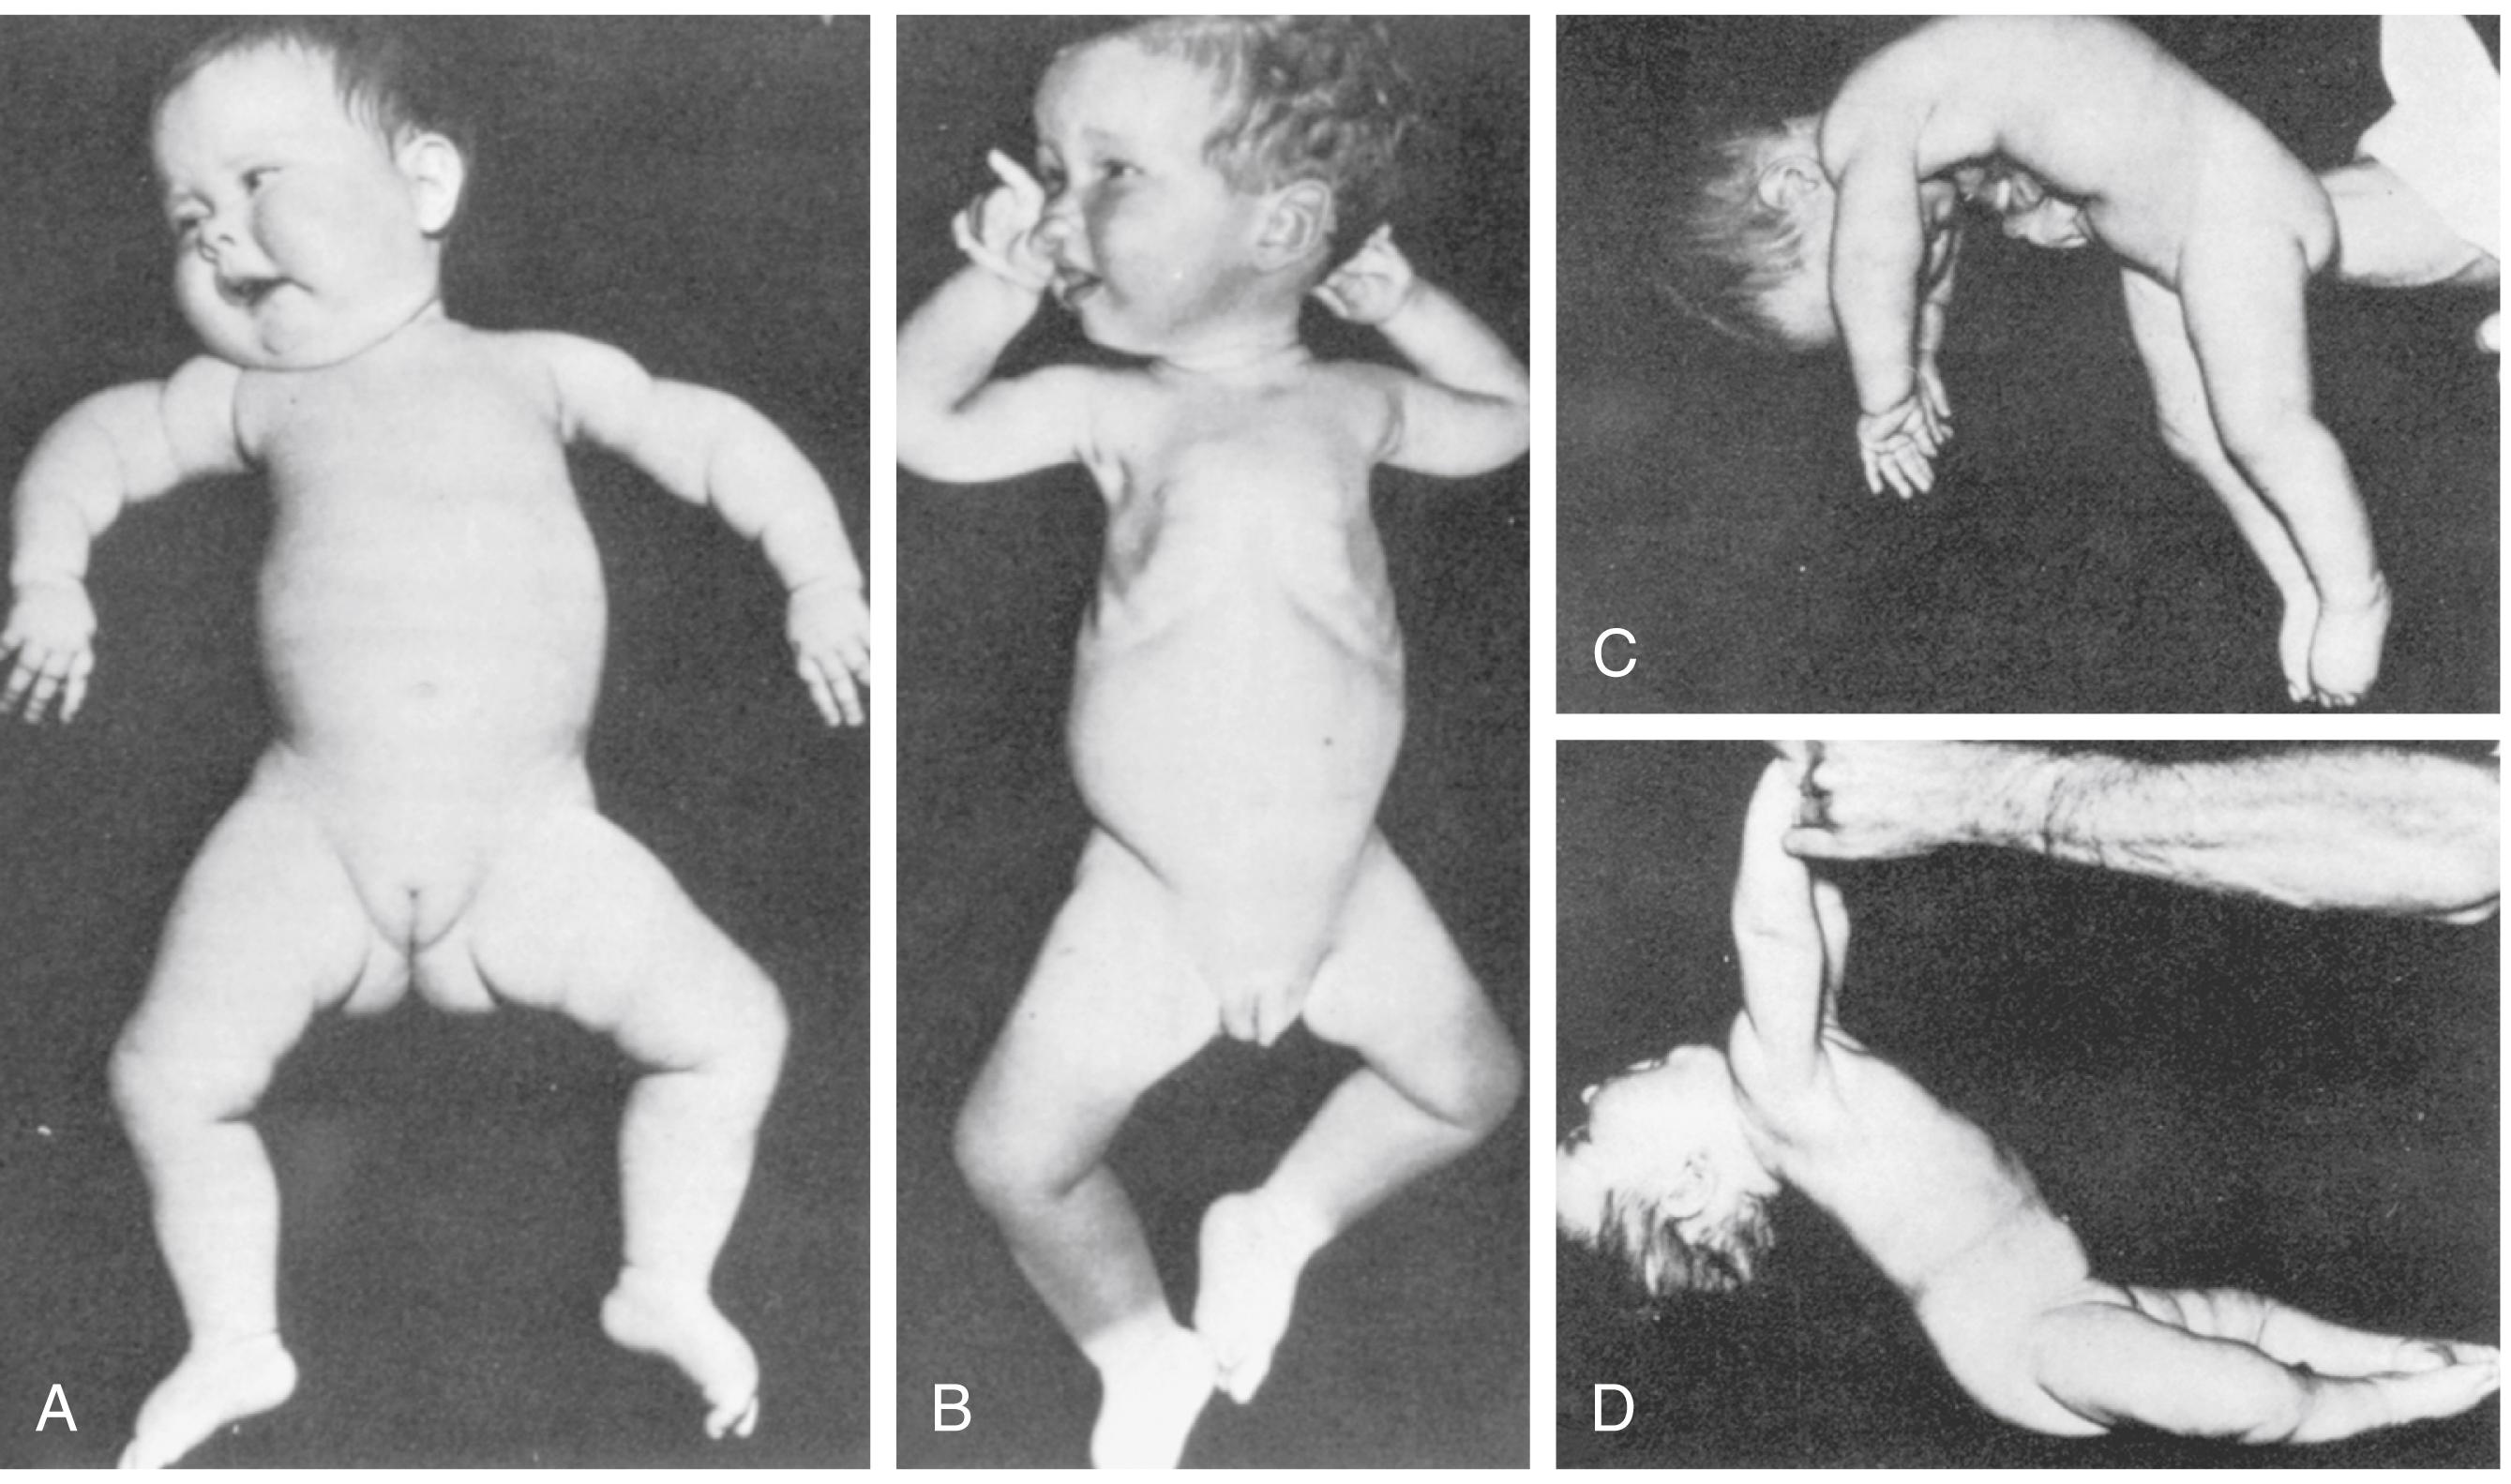 Fig. 35.4, Spinal muscular atrophy I: characteristic postures. A, A 6-week-old infant with severe weakness and hypotonia from birth. Note the frog-leg posture of the lower limbs and internal rotation (“jug-handle”) at the shoulders. B, A 1-year-old infant with frog-leg posture, external rotation at shoulders, intercostal recession, and normal facial expressions. A 6-week-old infant with marked weakness of the limbs and trunk giving the characteristic inverted “U” appearance on ventral suspension (C) and pull-to-sit (D).